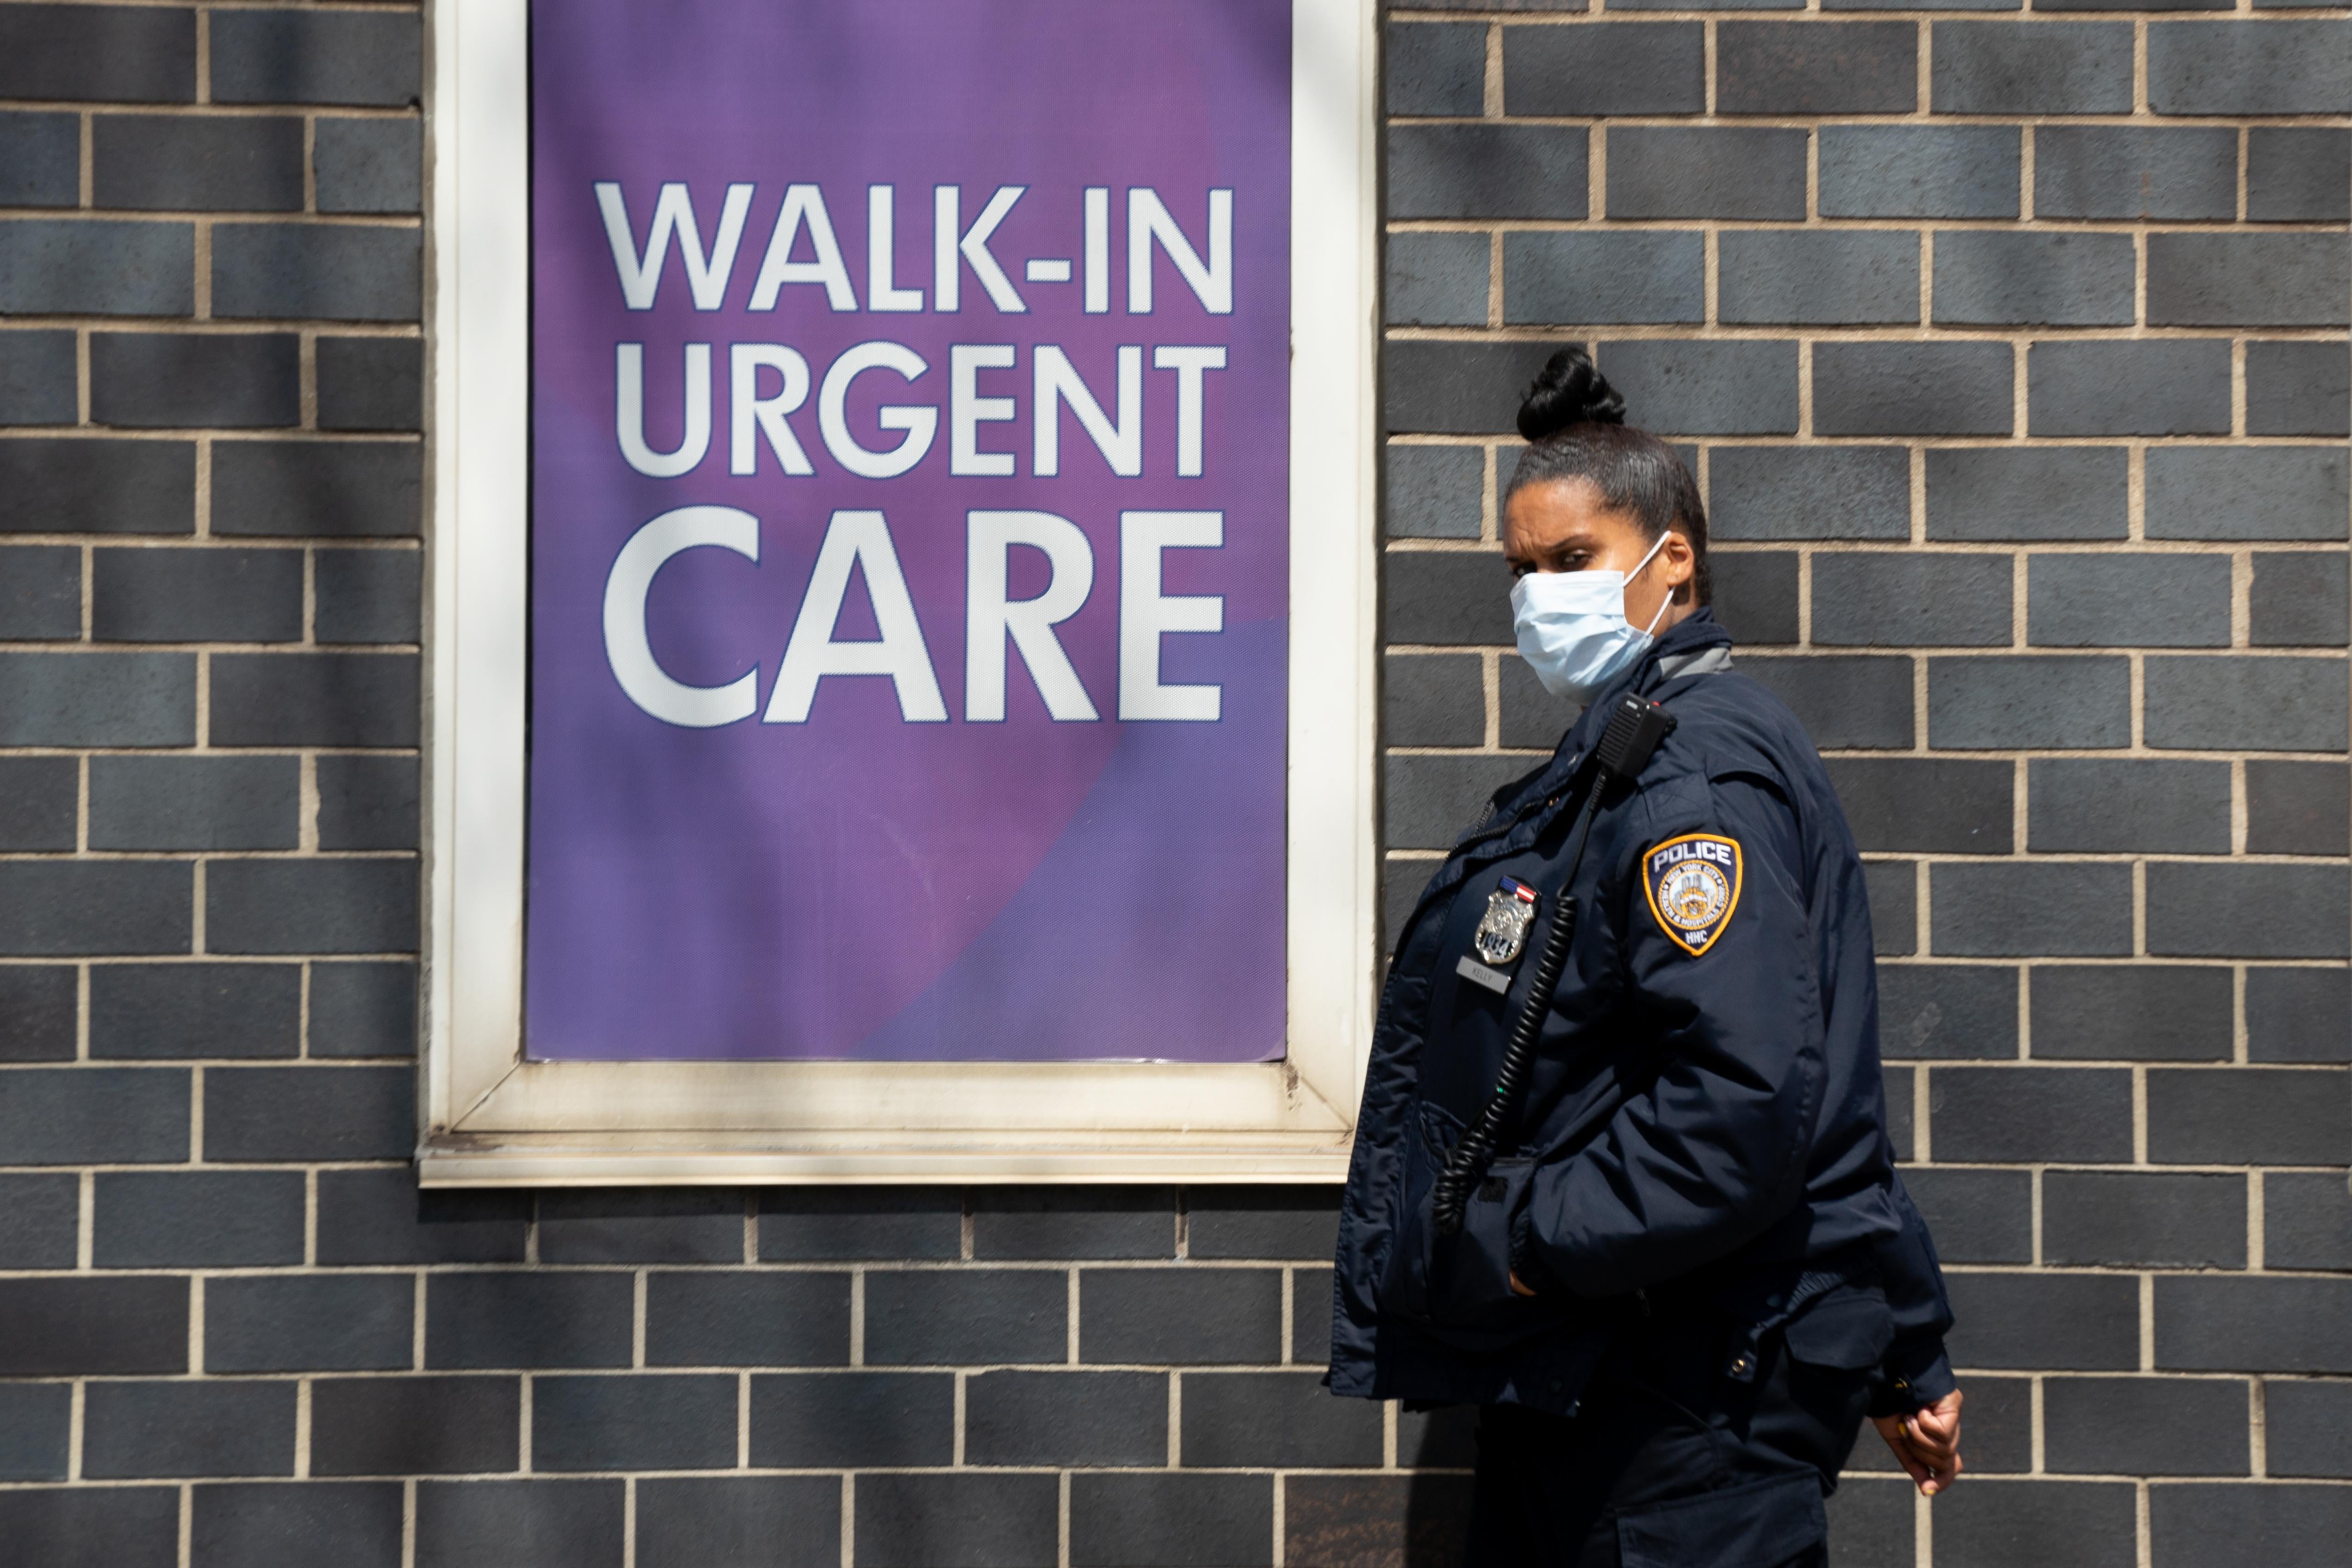 A police officer in a face mask walks near a sign that says "Walk-In Urgent Care."